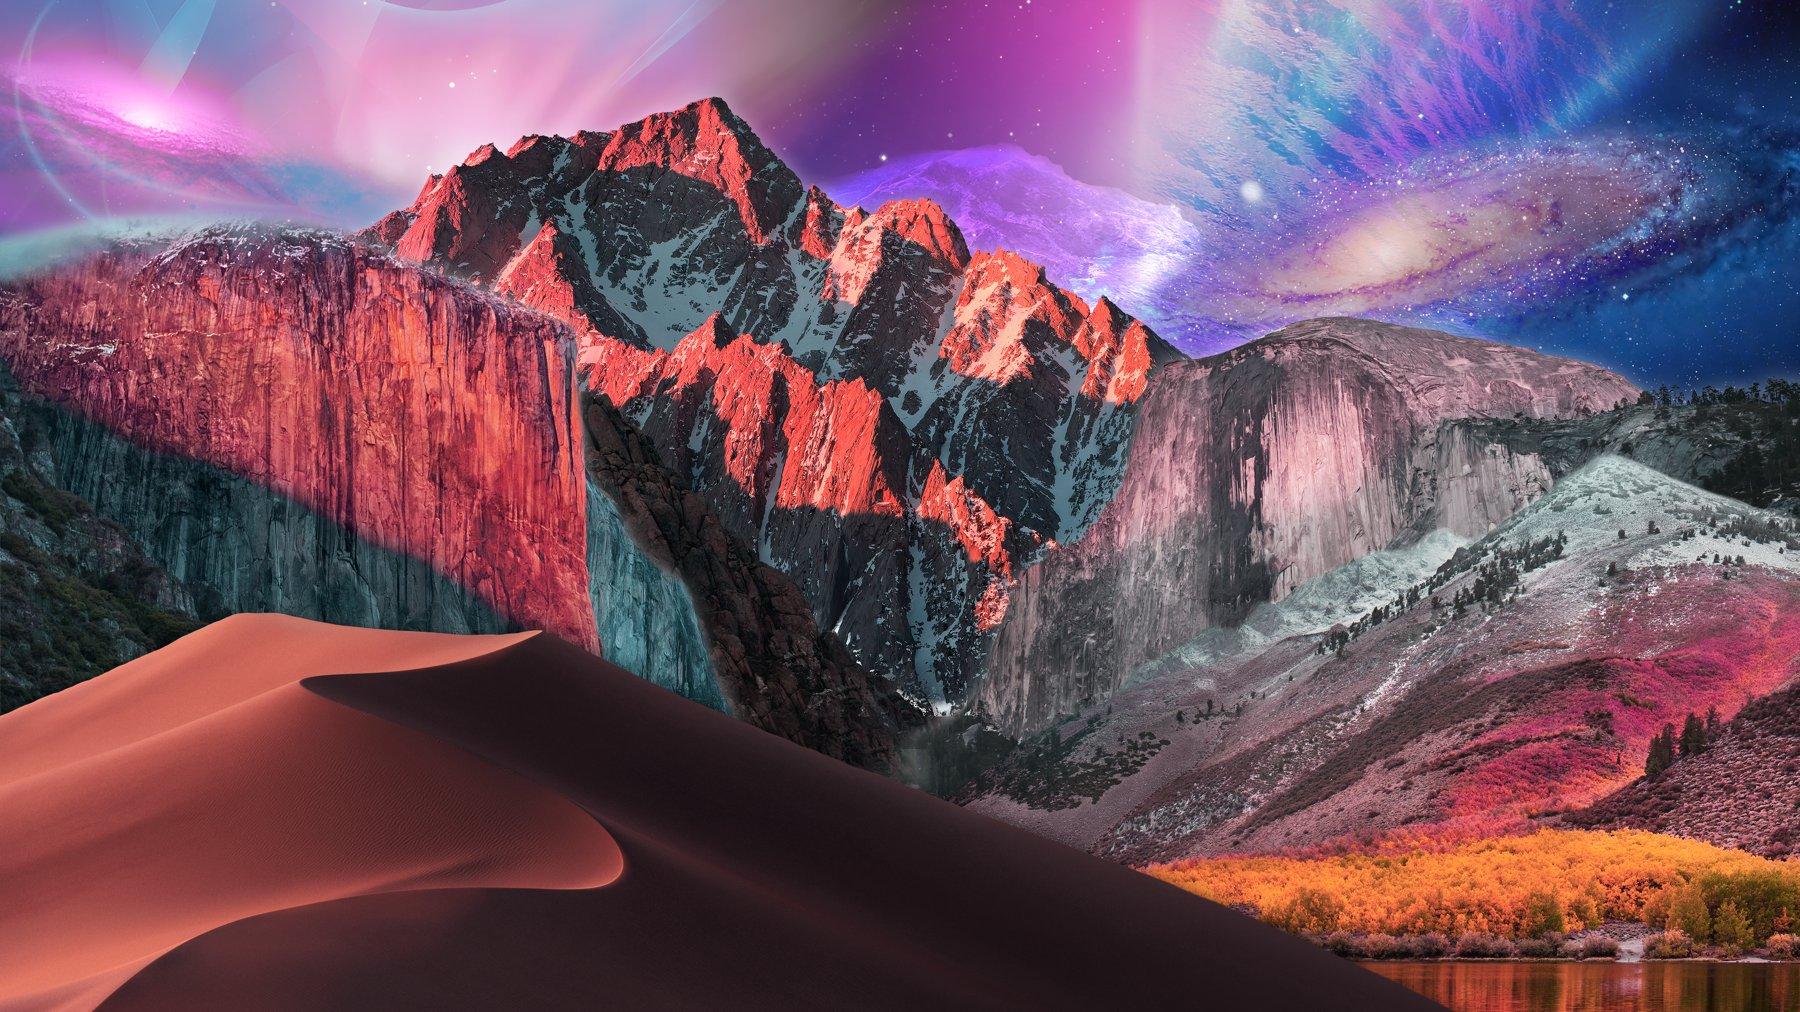 Here's Every Mac Wallpaper from Mac OS X 10.0 Cheetah to